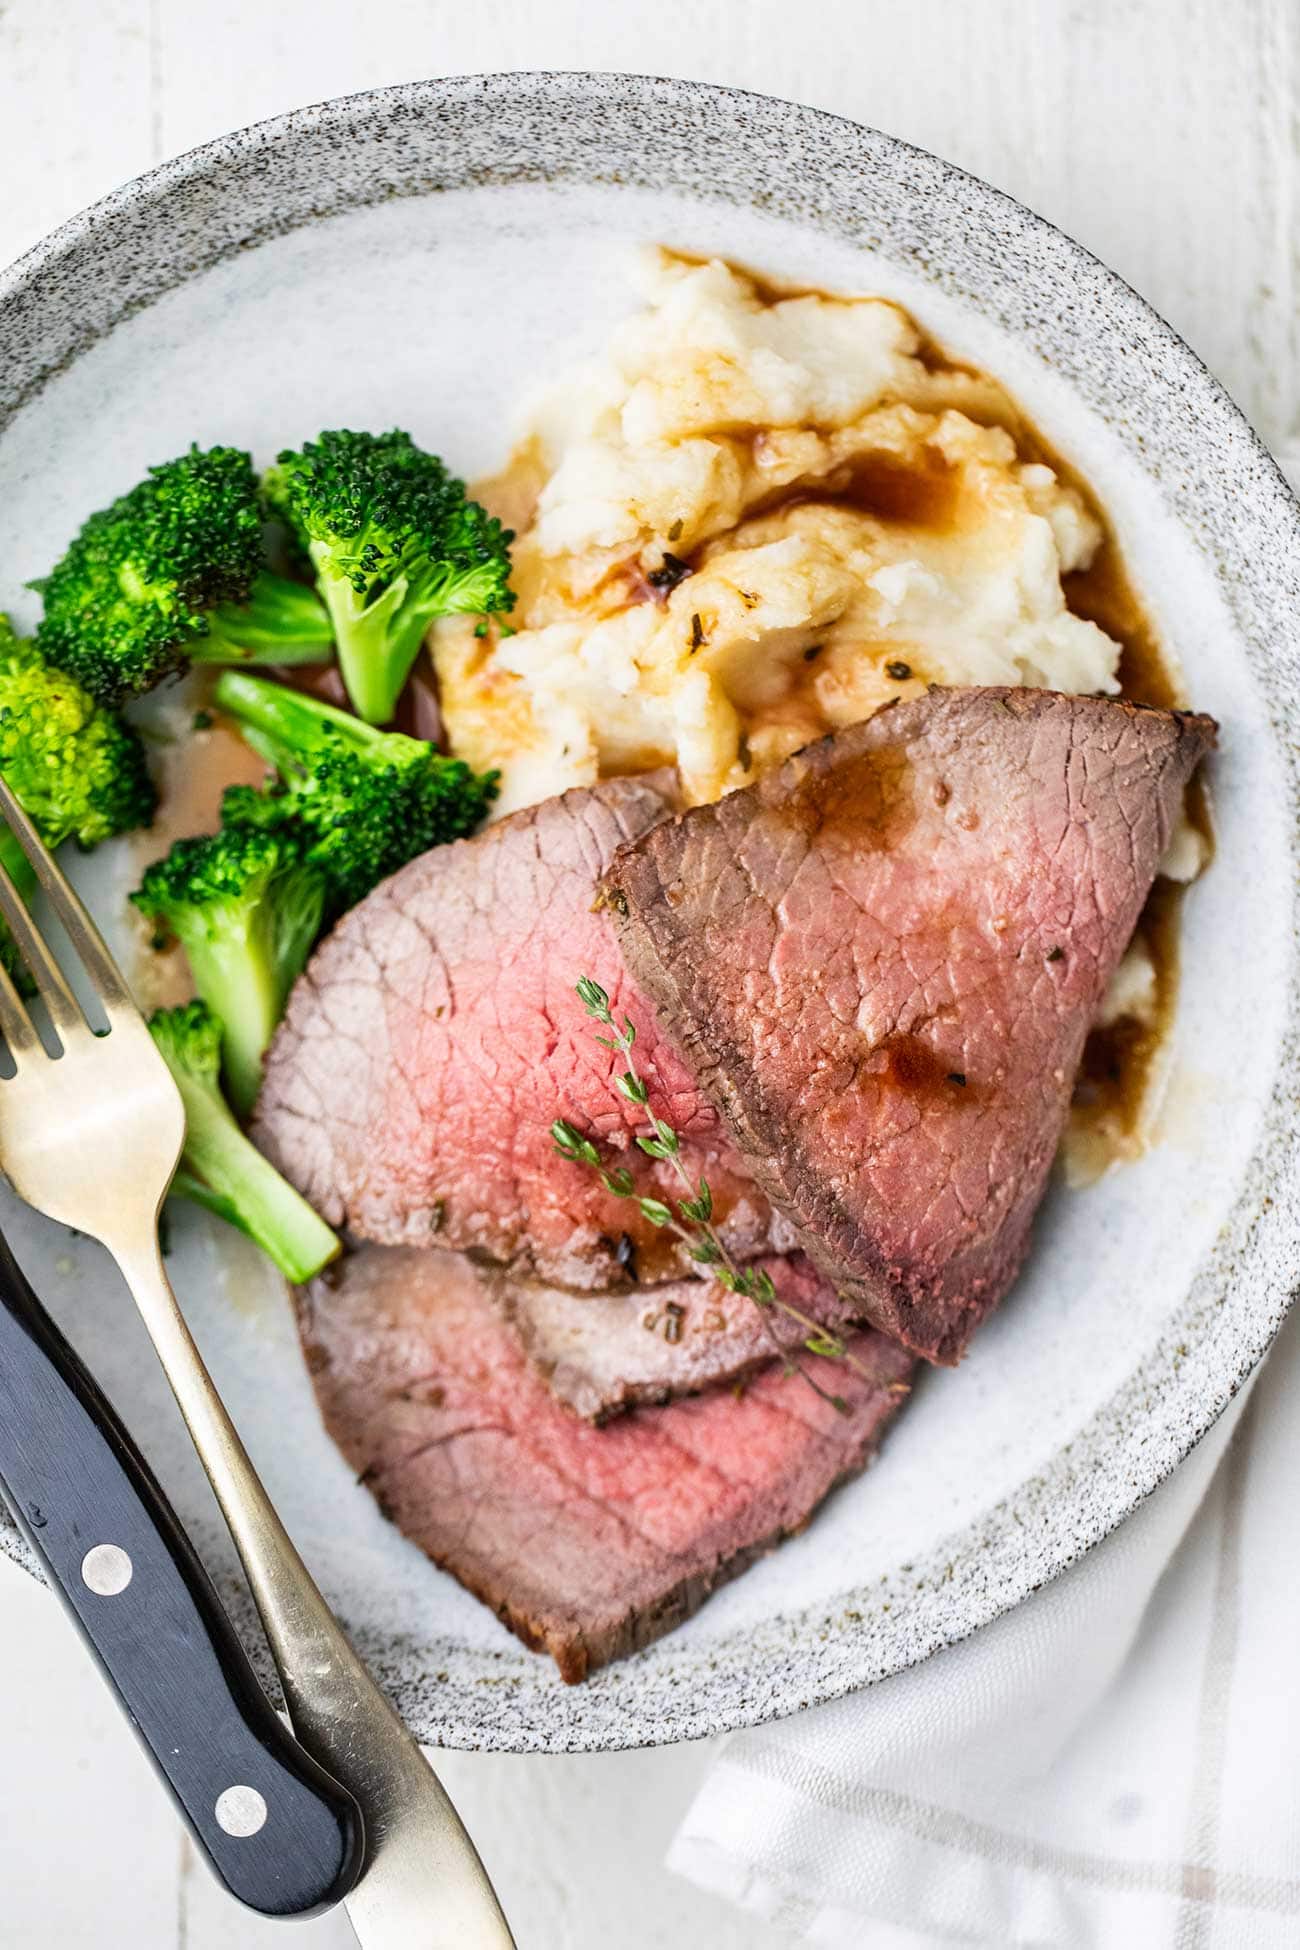 A plate shown with mashed potatoes, broccoli, and thinly sliced beef.